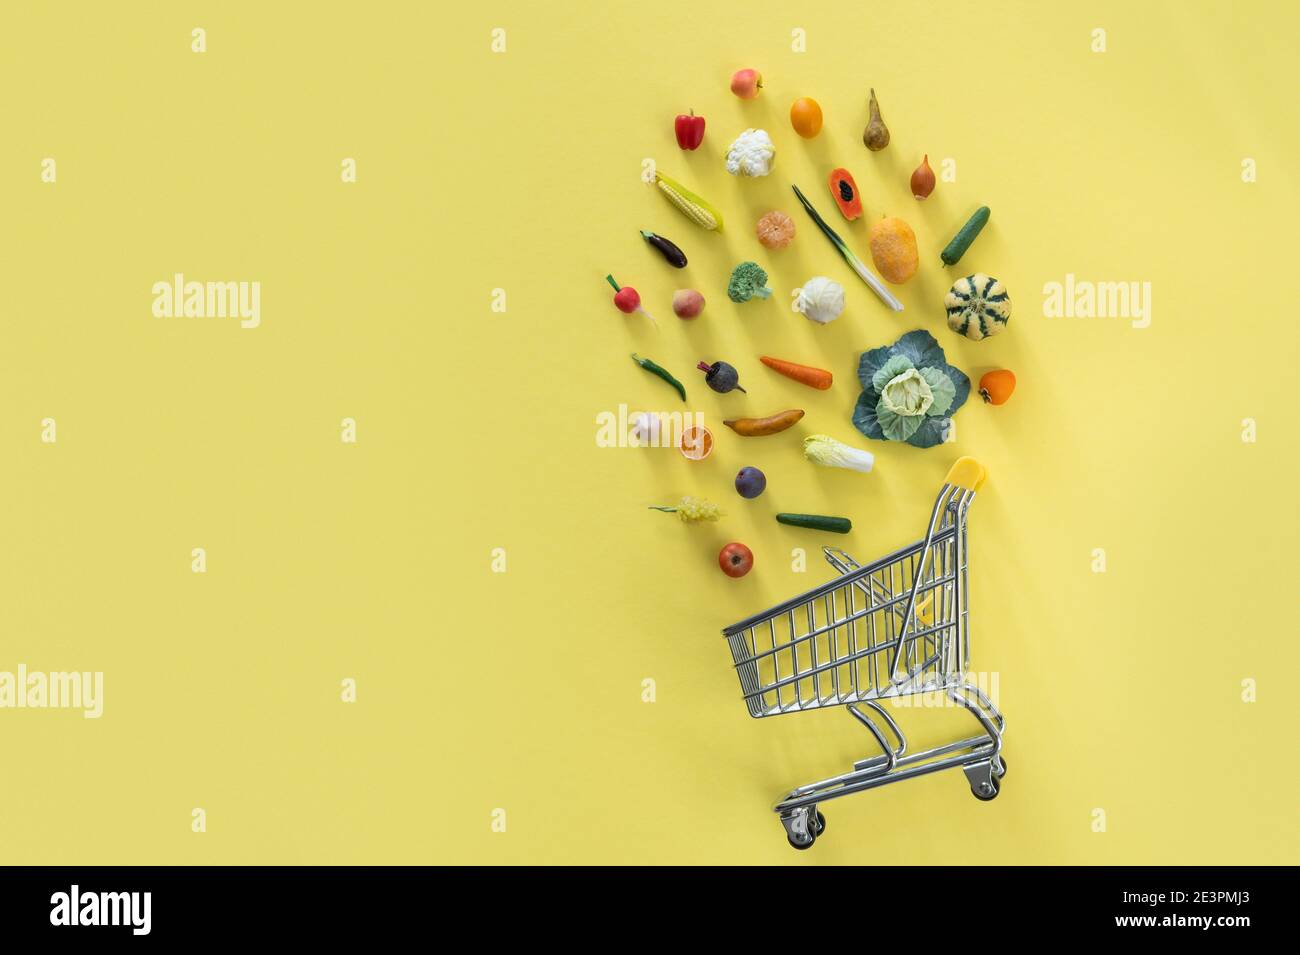 Grocery shopping concept - different foods with shopping tray on yellow background Stock Photo